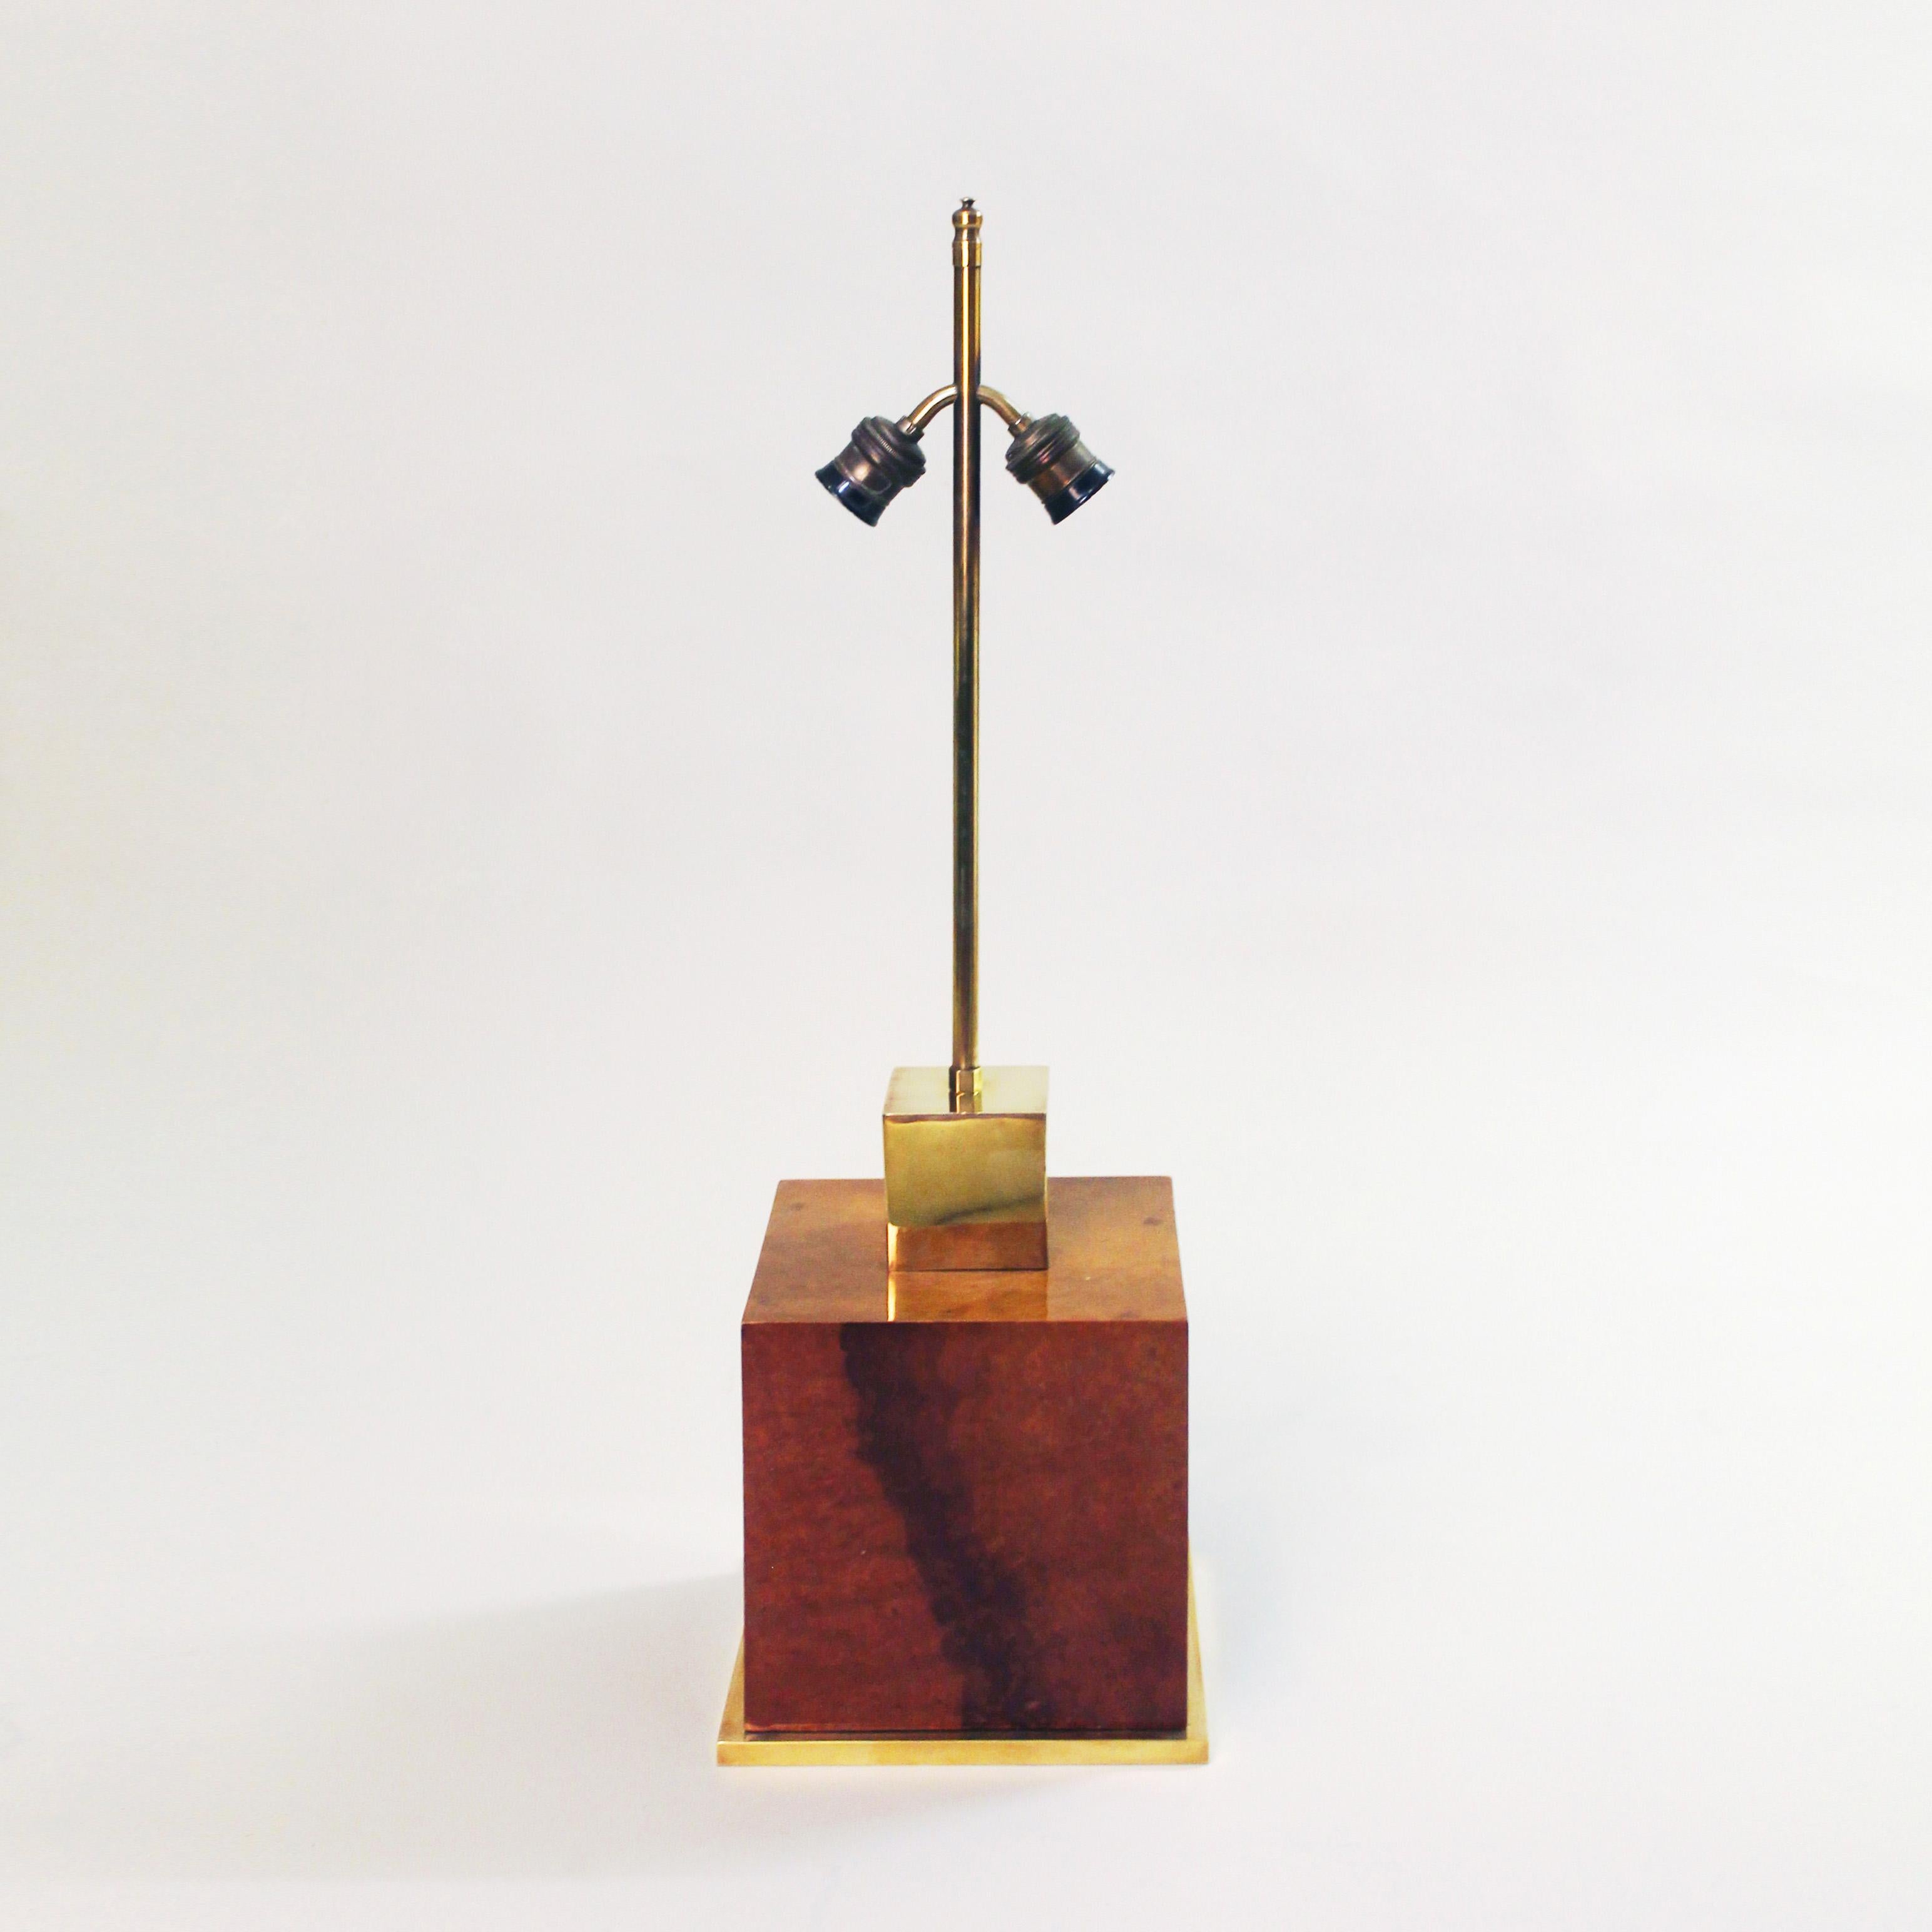 A simple but amazing table lamp by Willy Rizzo. A large burl walnut lacquered cube body is flanked between a brass base trim and the brass cube and finishings on top. 
The burl wood is beautifully book-matched giving a visually pleasing result.